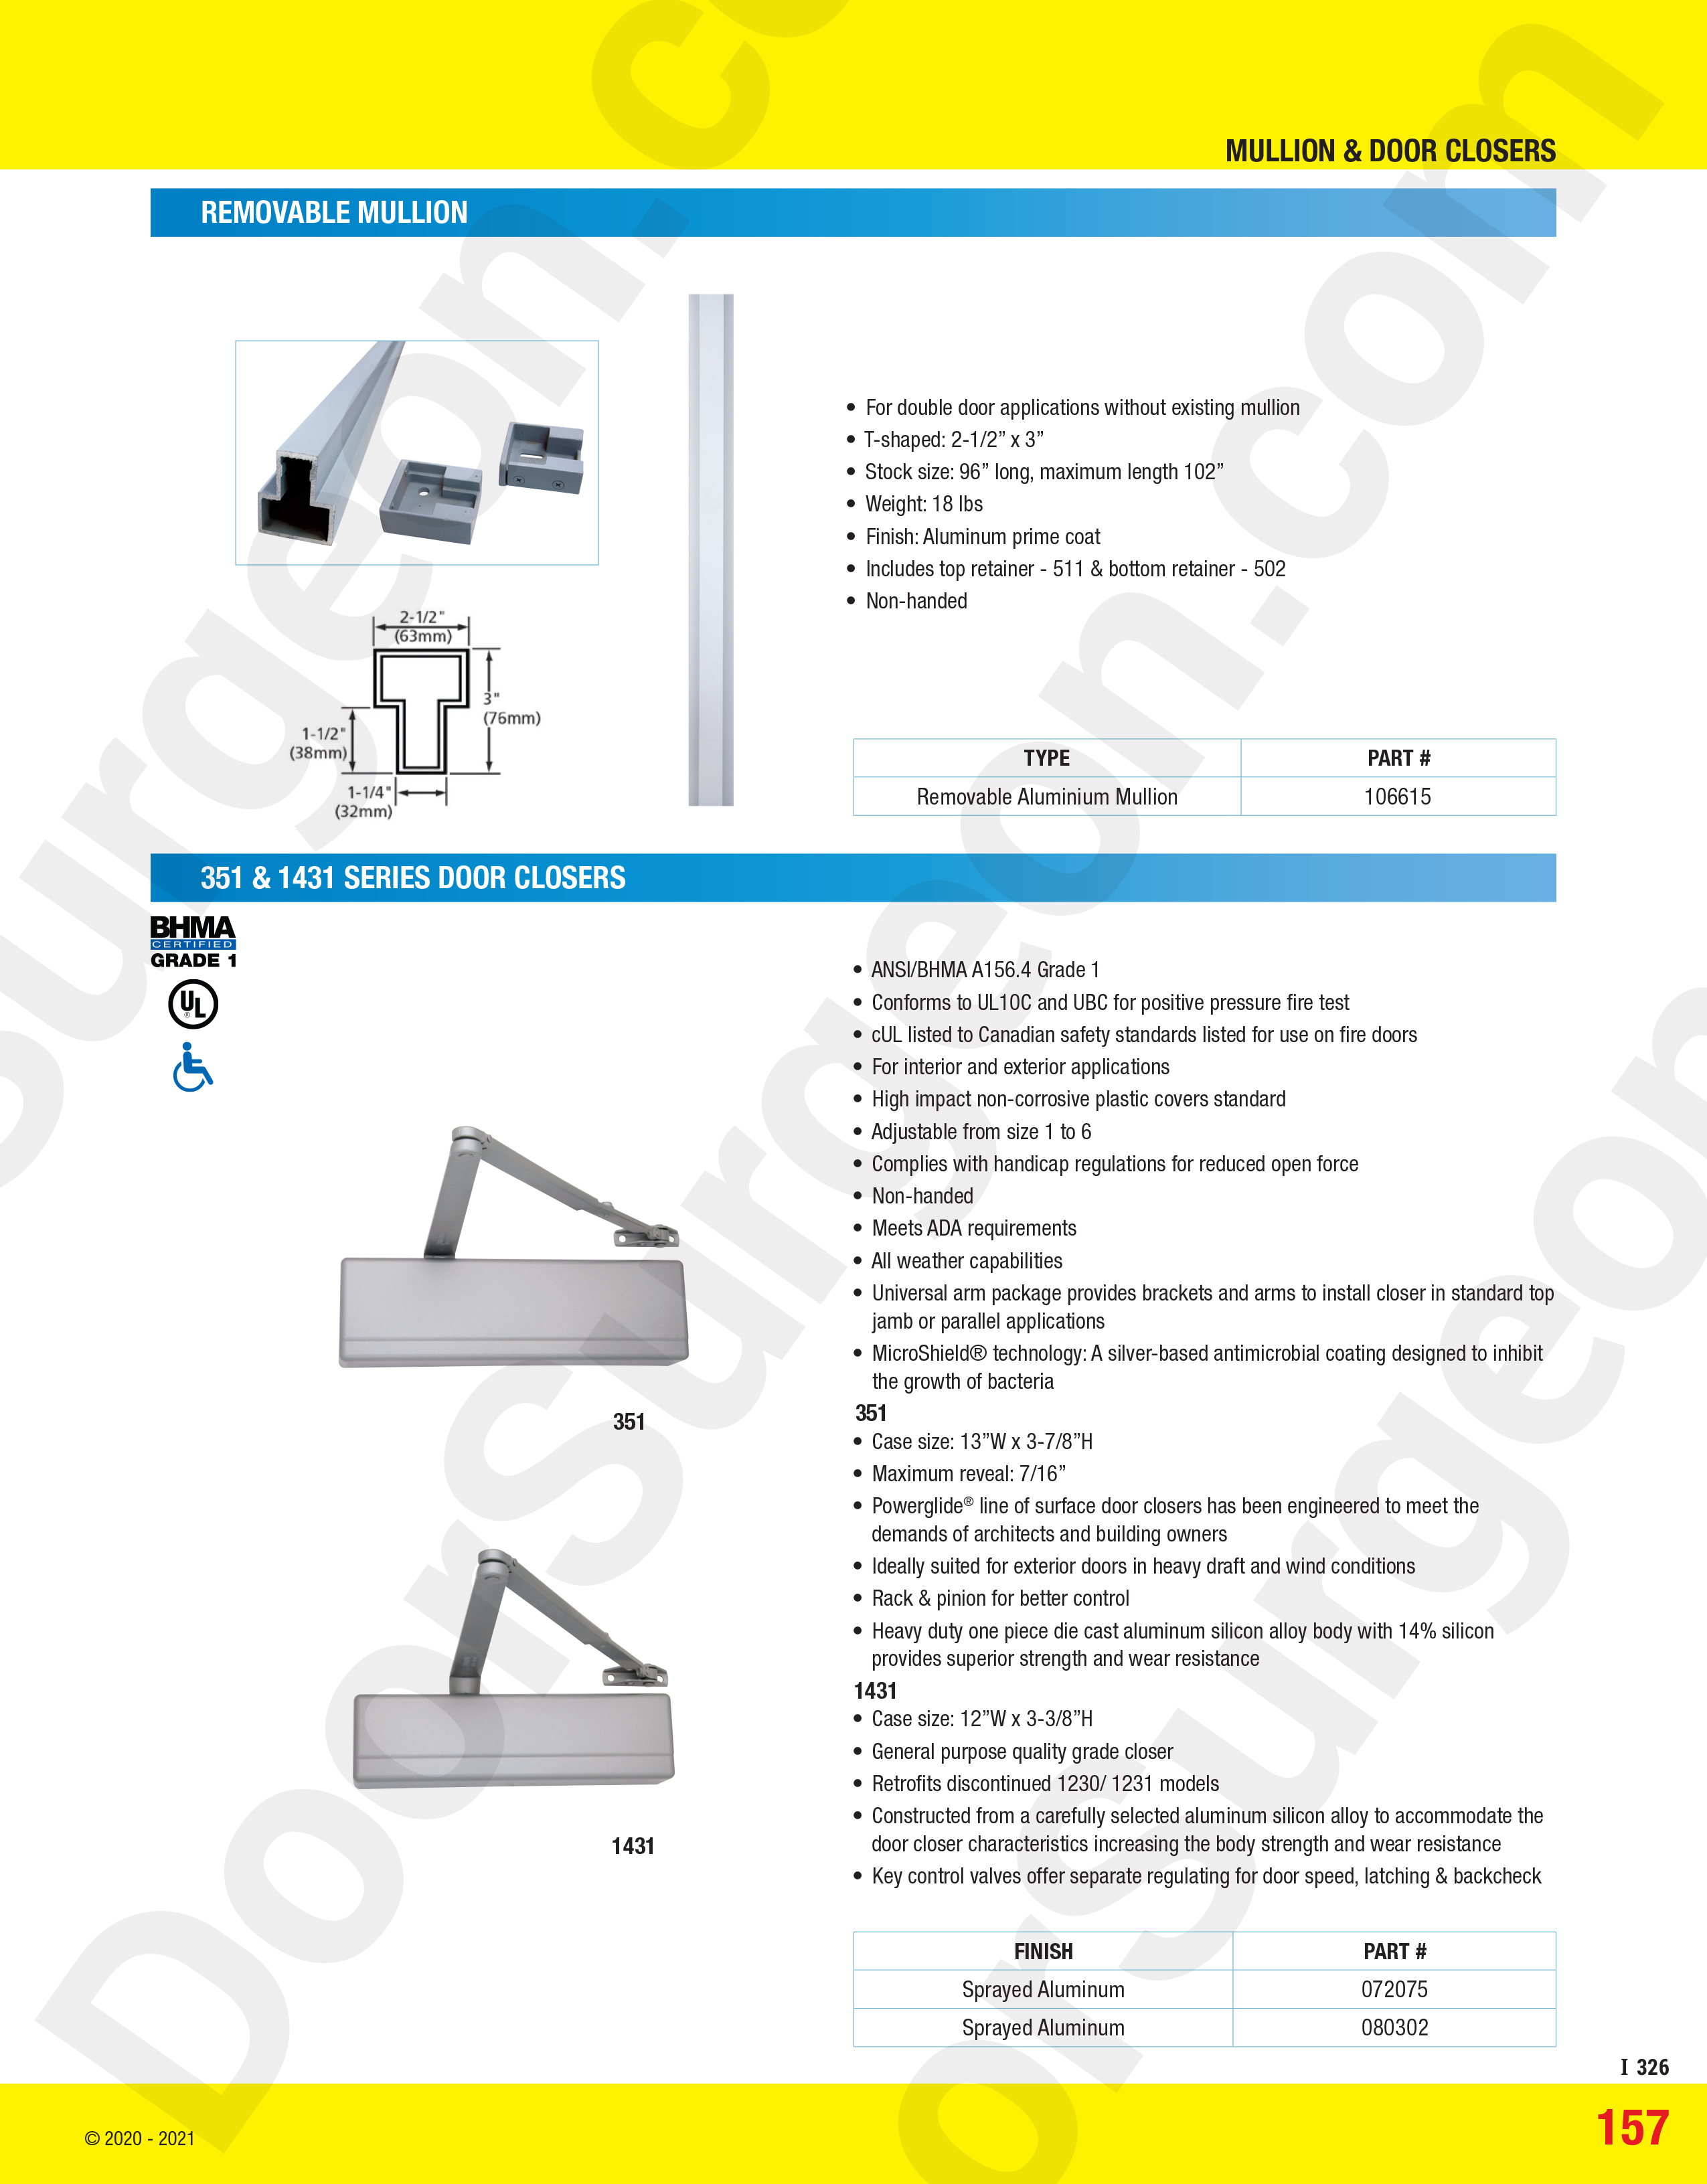 Removable mullion, 351 and 1431 series door closers.